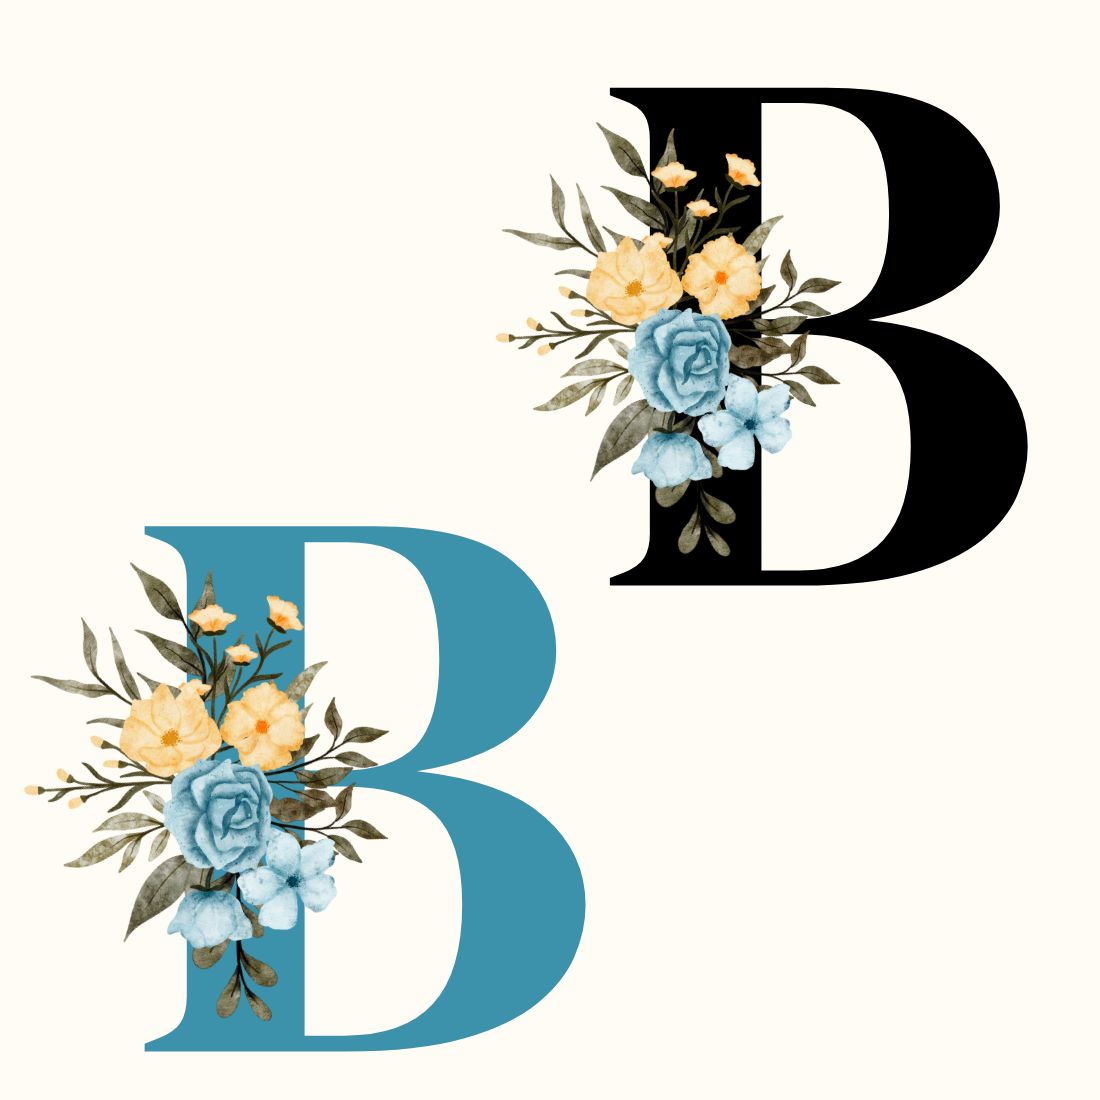 Beautiful Letter B preview image.